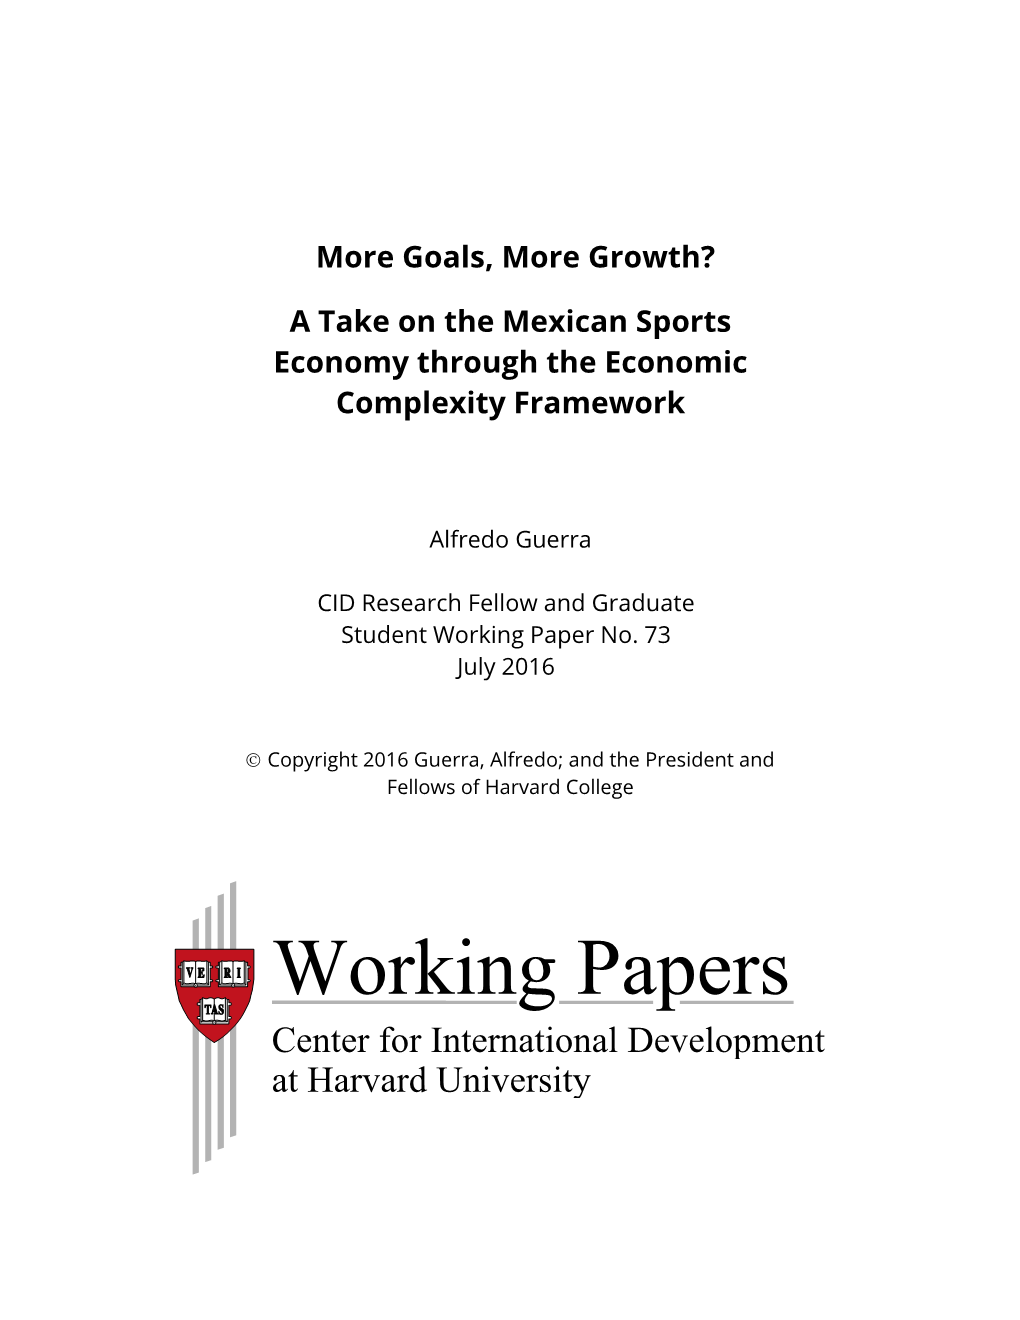 A Take on the Mexican Sports Economy Through the Economic Complexity Framework